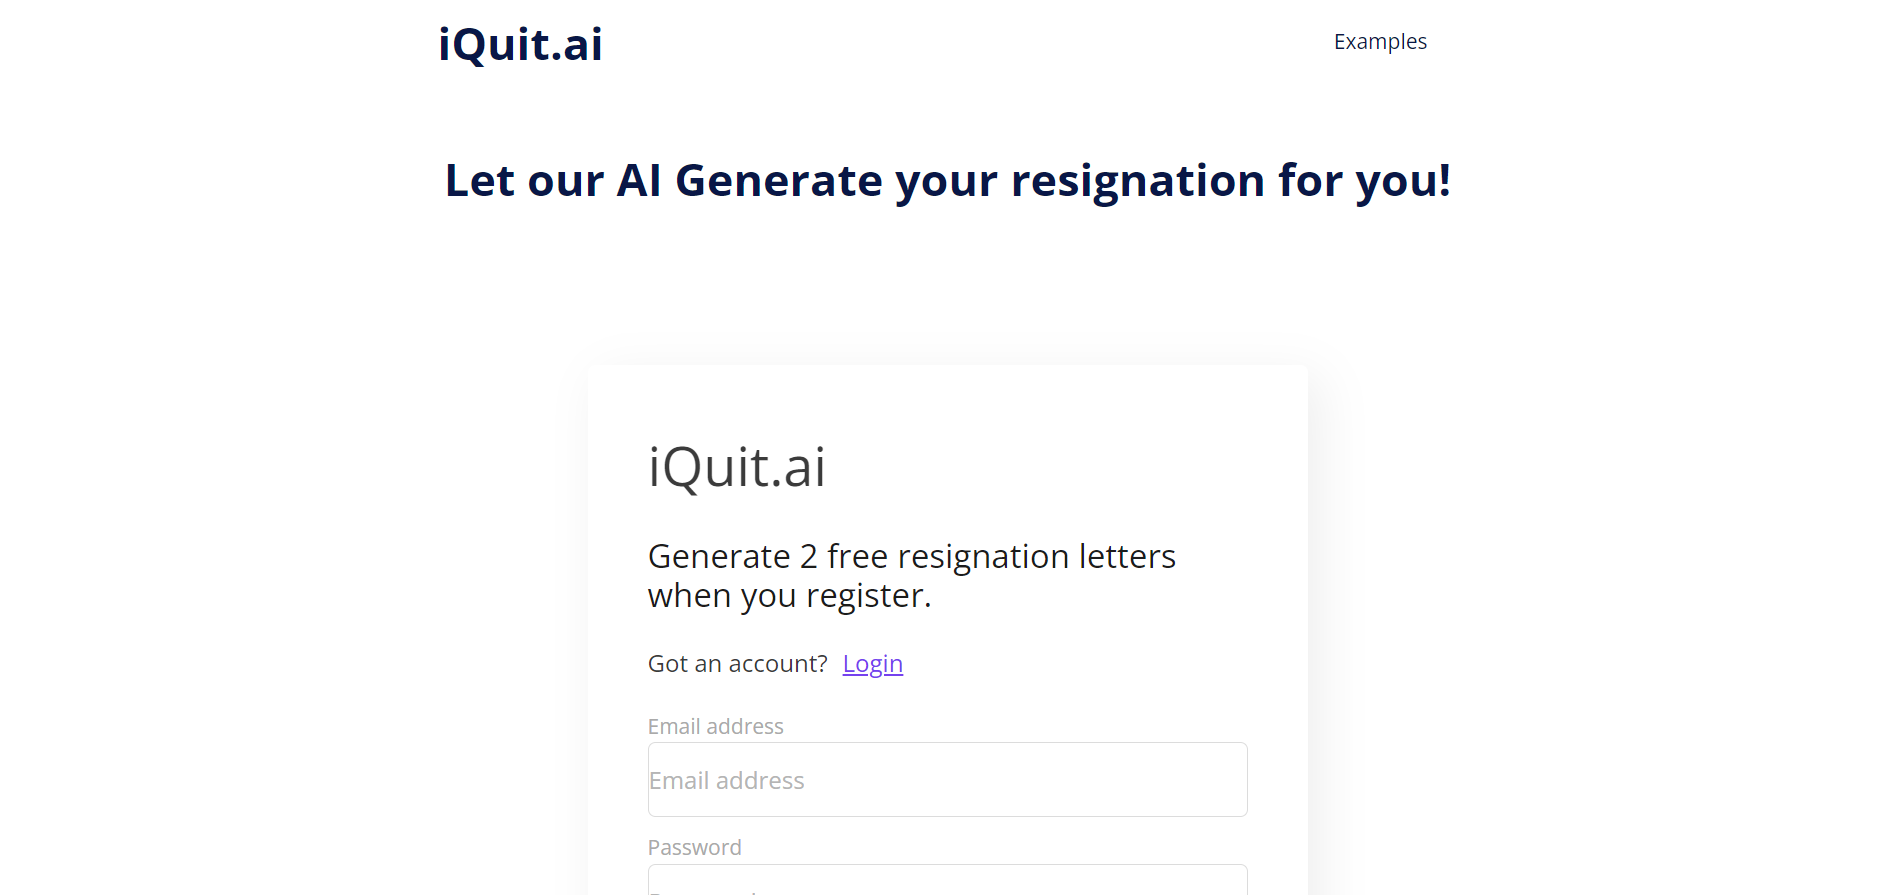 Resigning?… IQuit.ai is here to help with it’s Resignation Letter Generator!